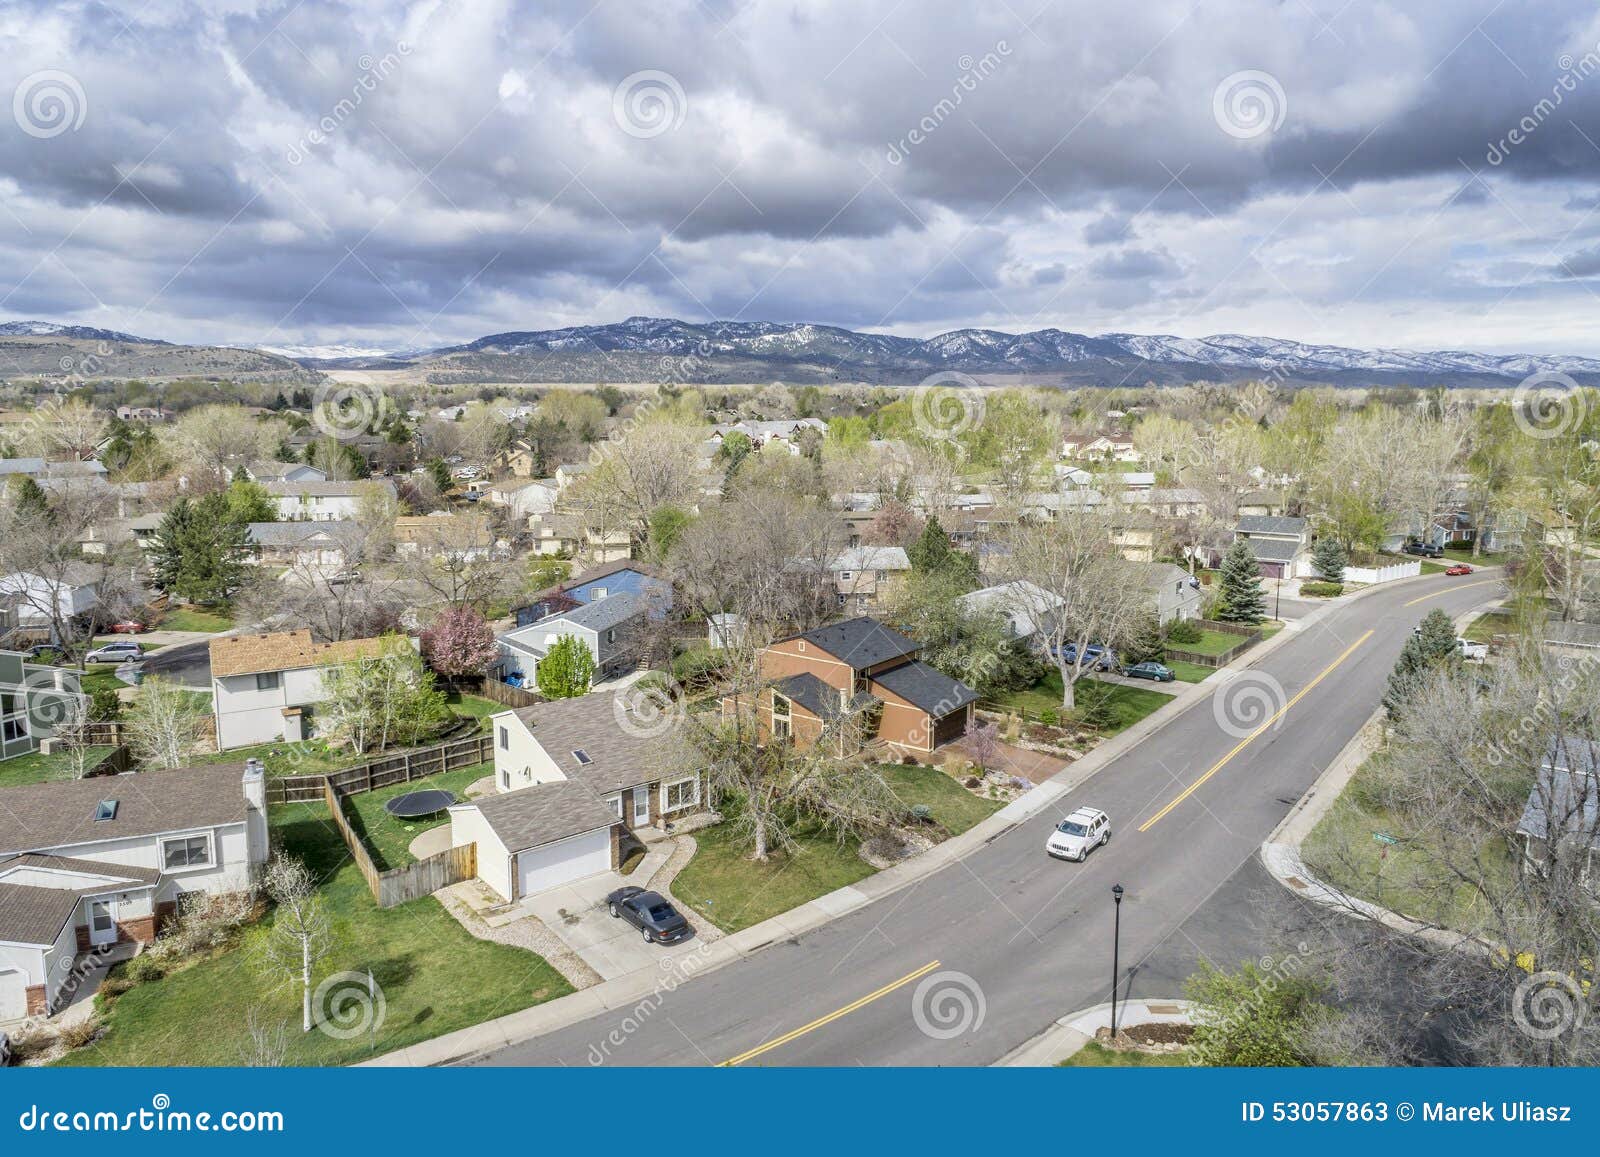 aerial view fort collins colorado co usa april typical residential neighborhood along front range rocky mountains 53057863